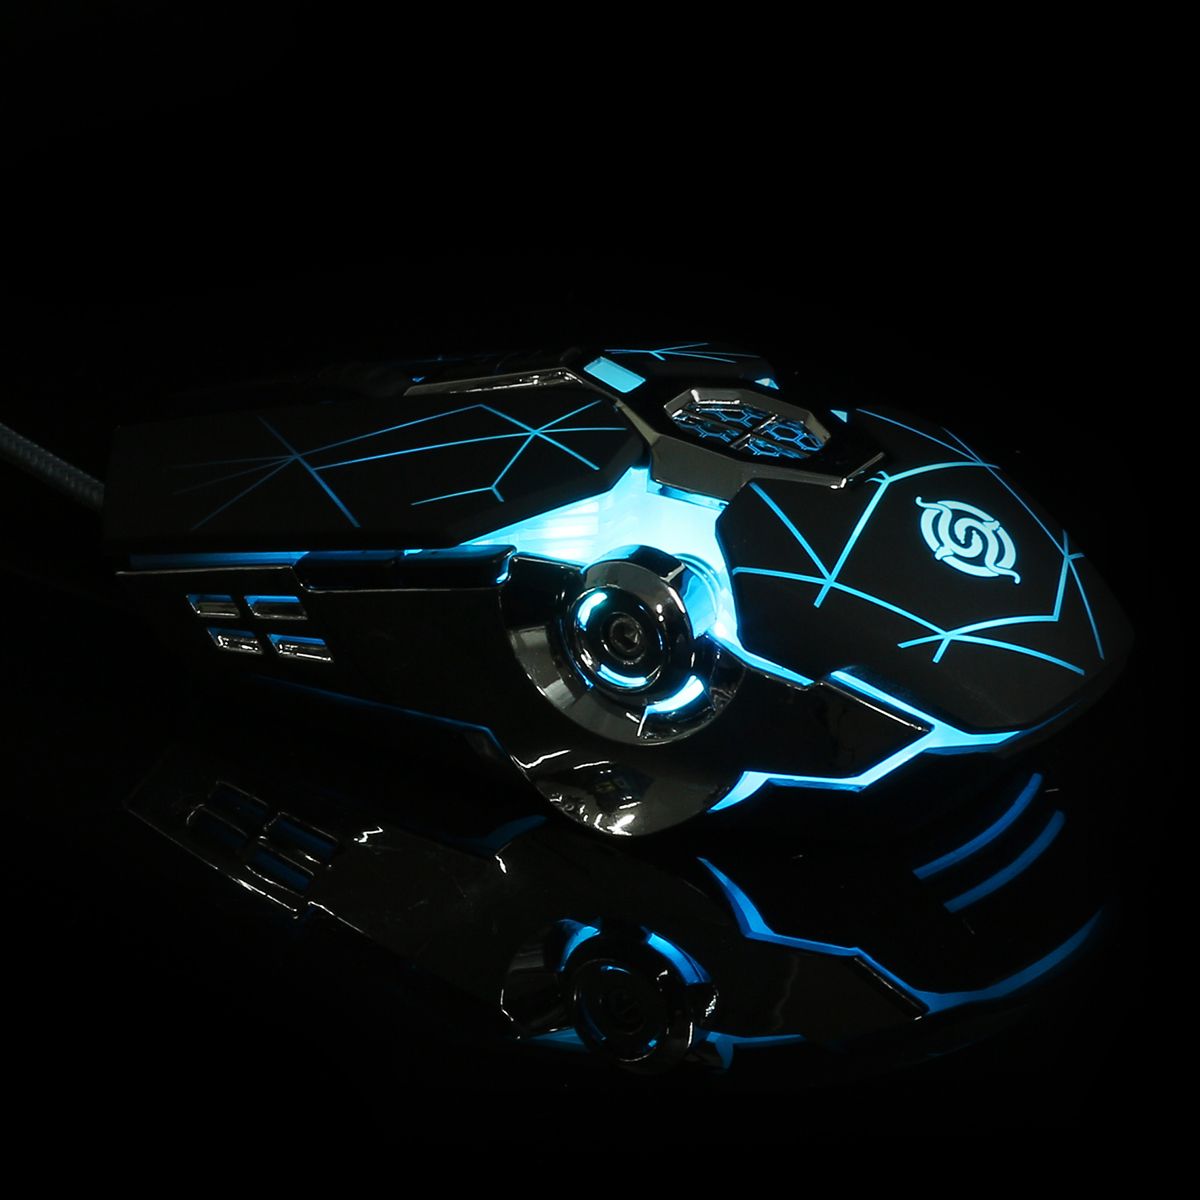 Q7-4000-DPI-USB-Wired-Colorful-LED-7-Buttons-Professional-Mechanical-Gaming-Mouse-for-Laptop-PC-Game-1575715